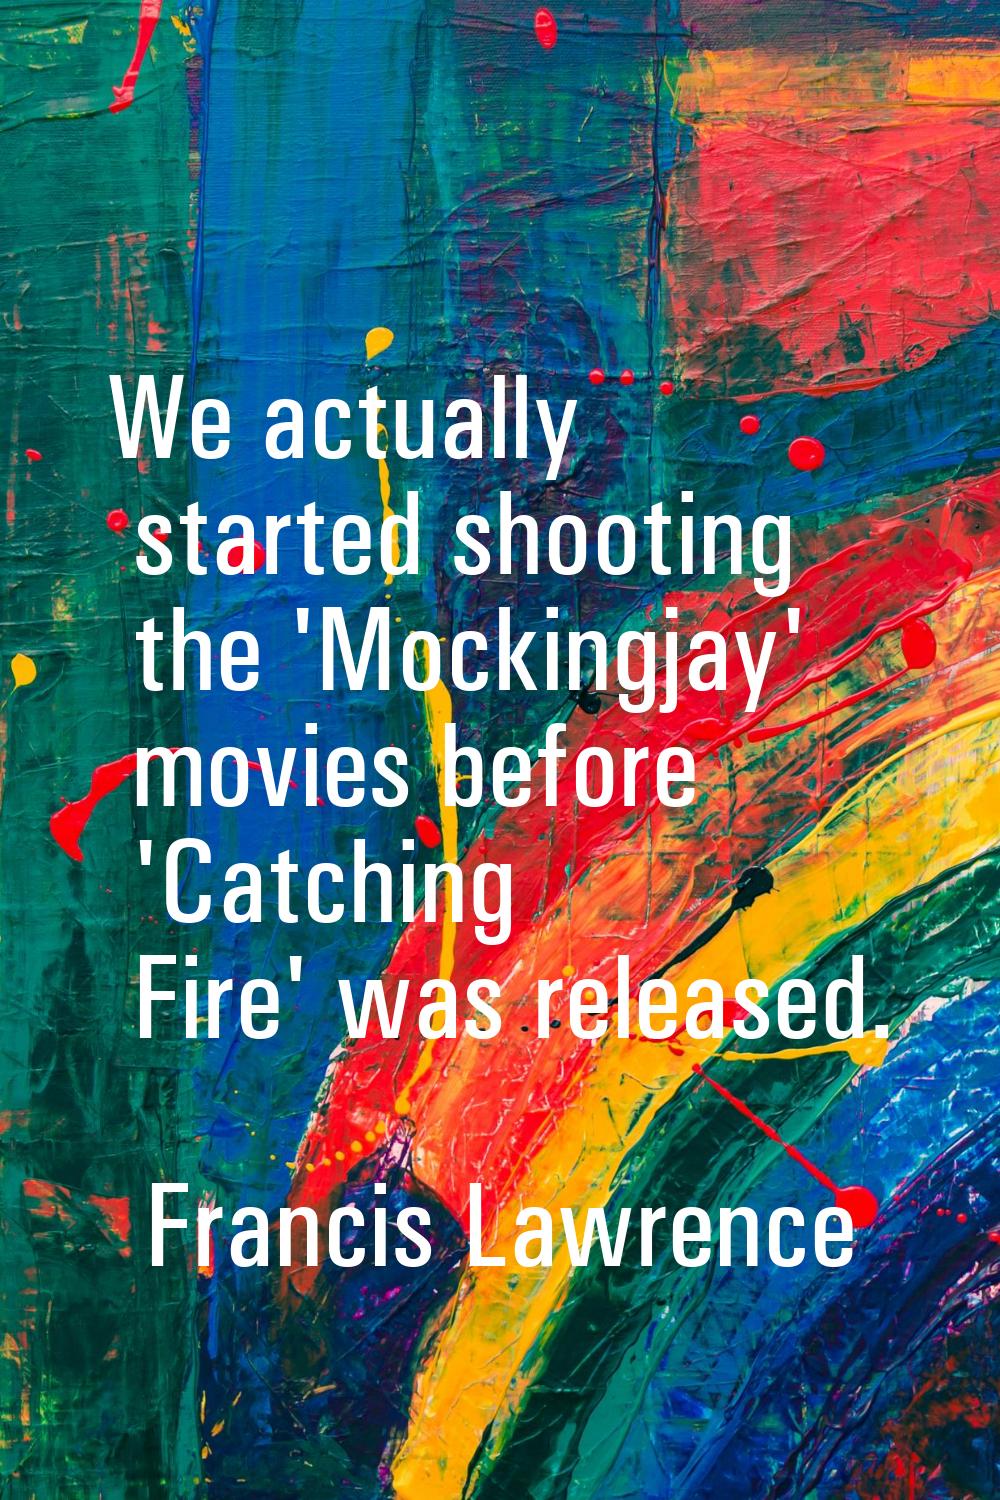 We actually started shooting the 'Mockingjay' movies before 'Catching Fire' was released.